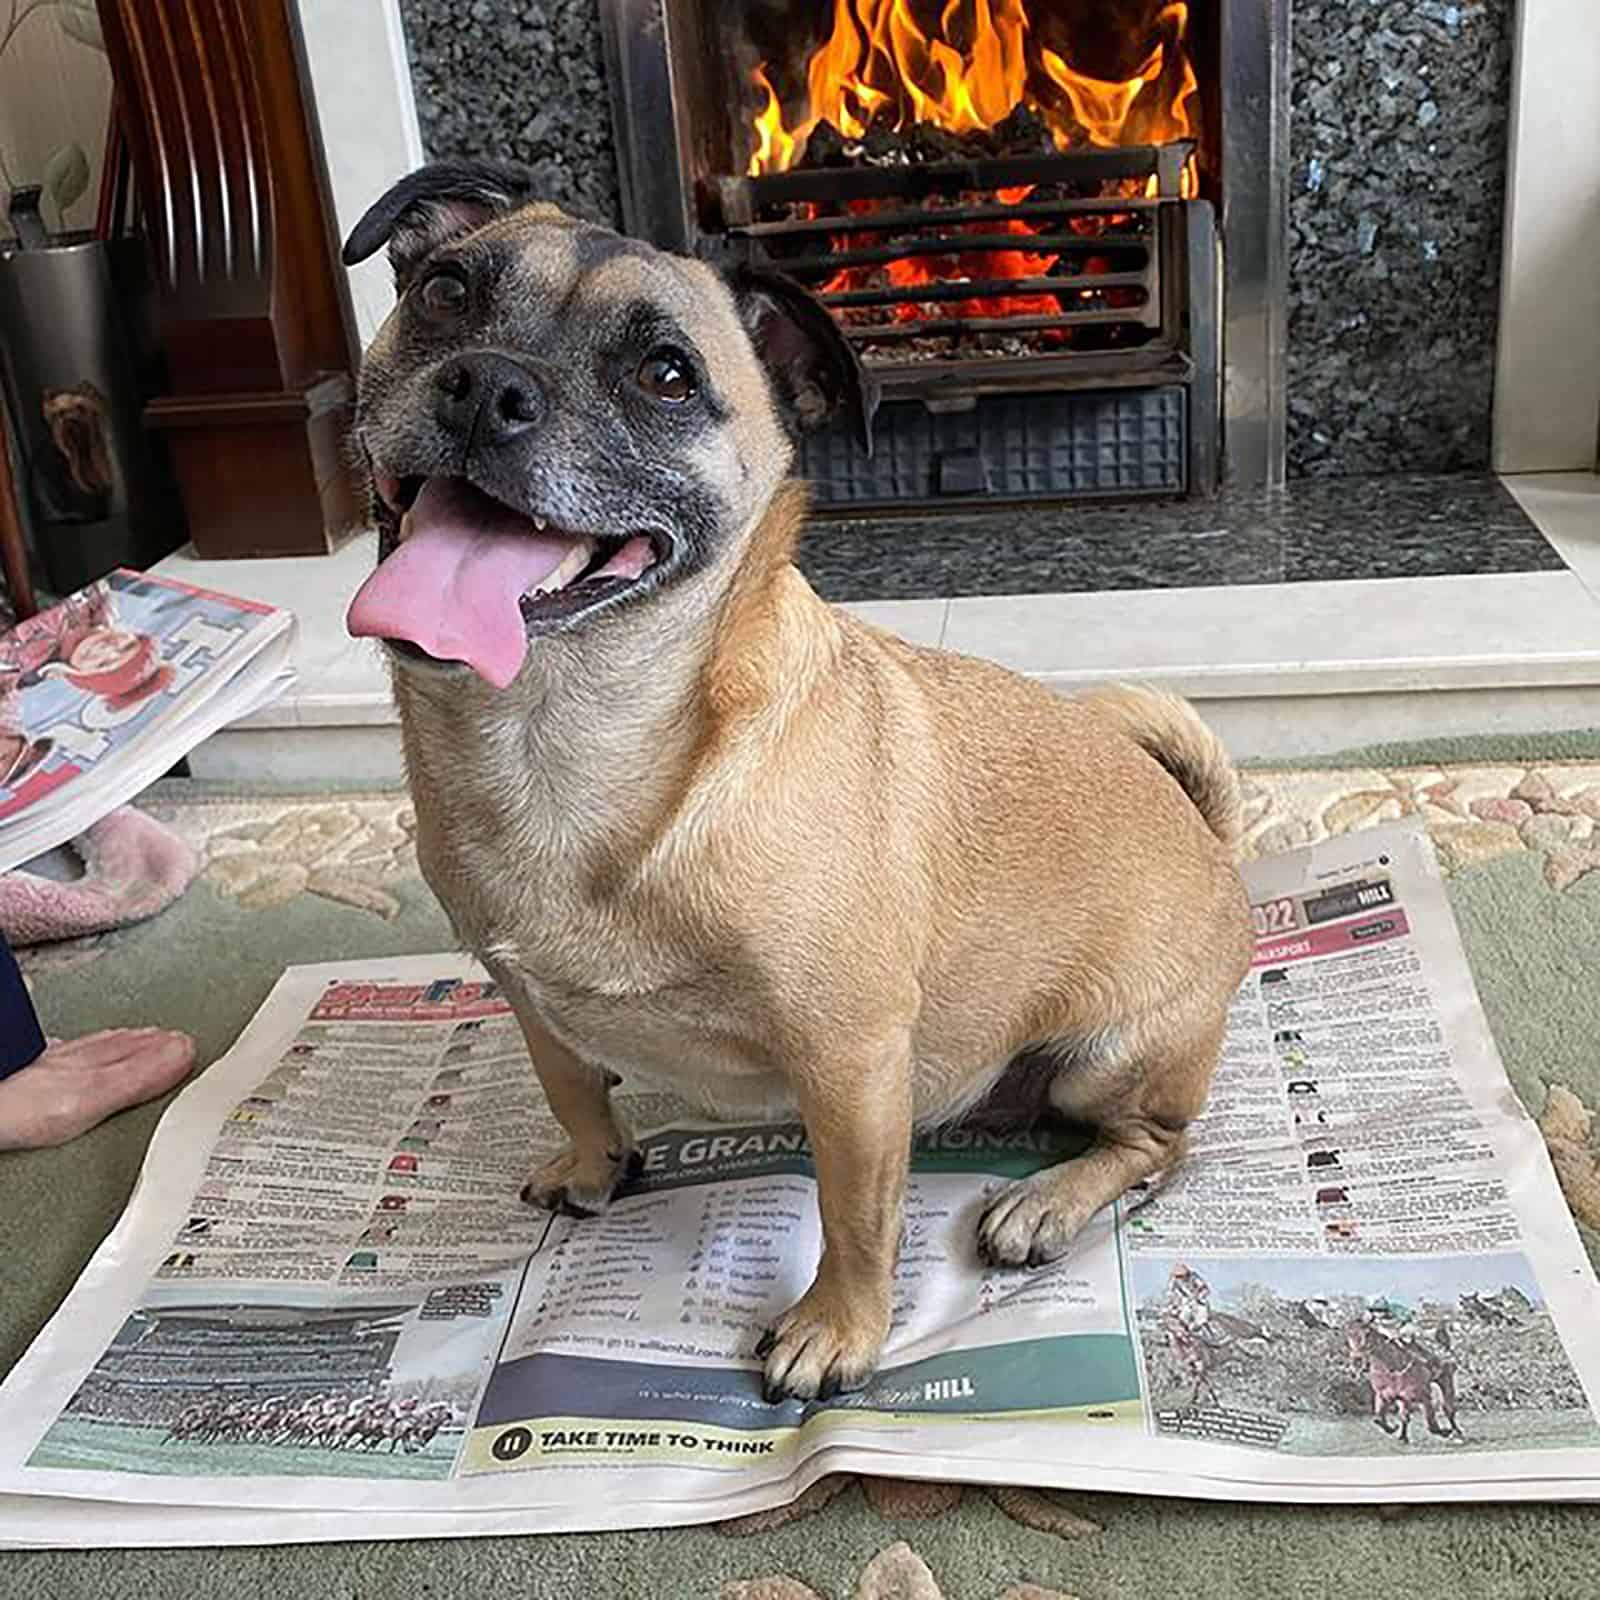 jug dog sitting on newspapers in the living room